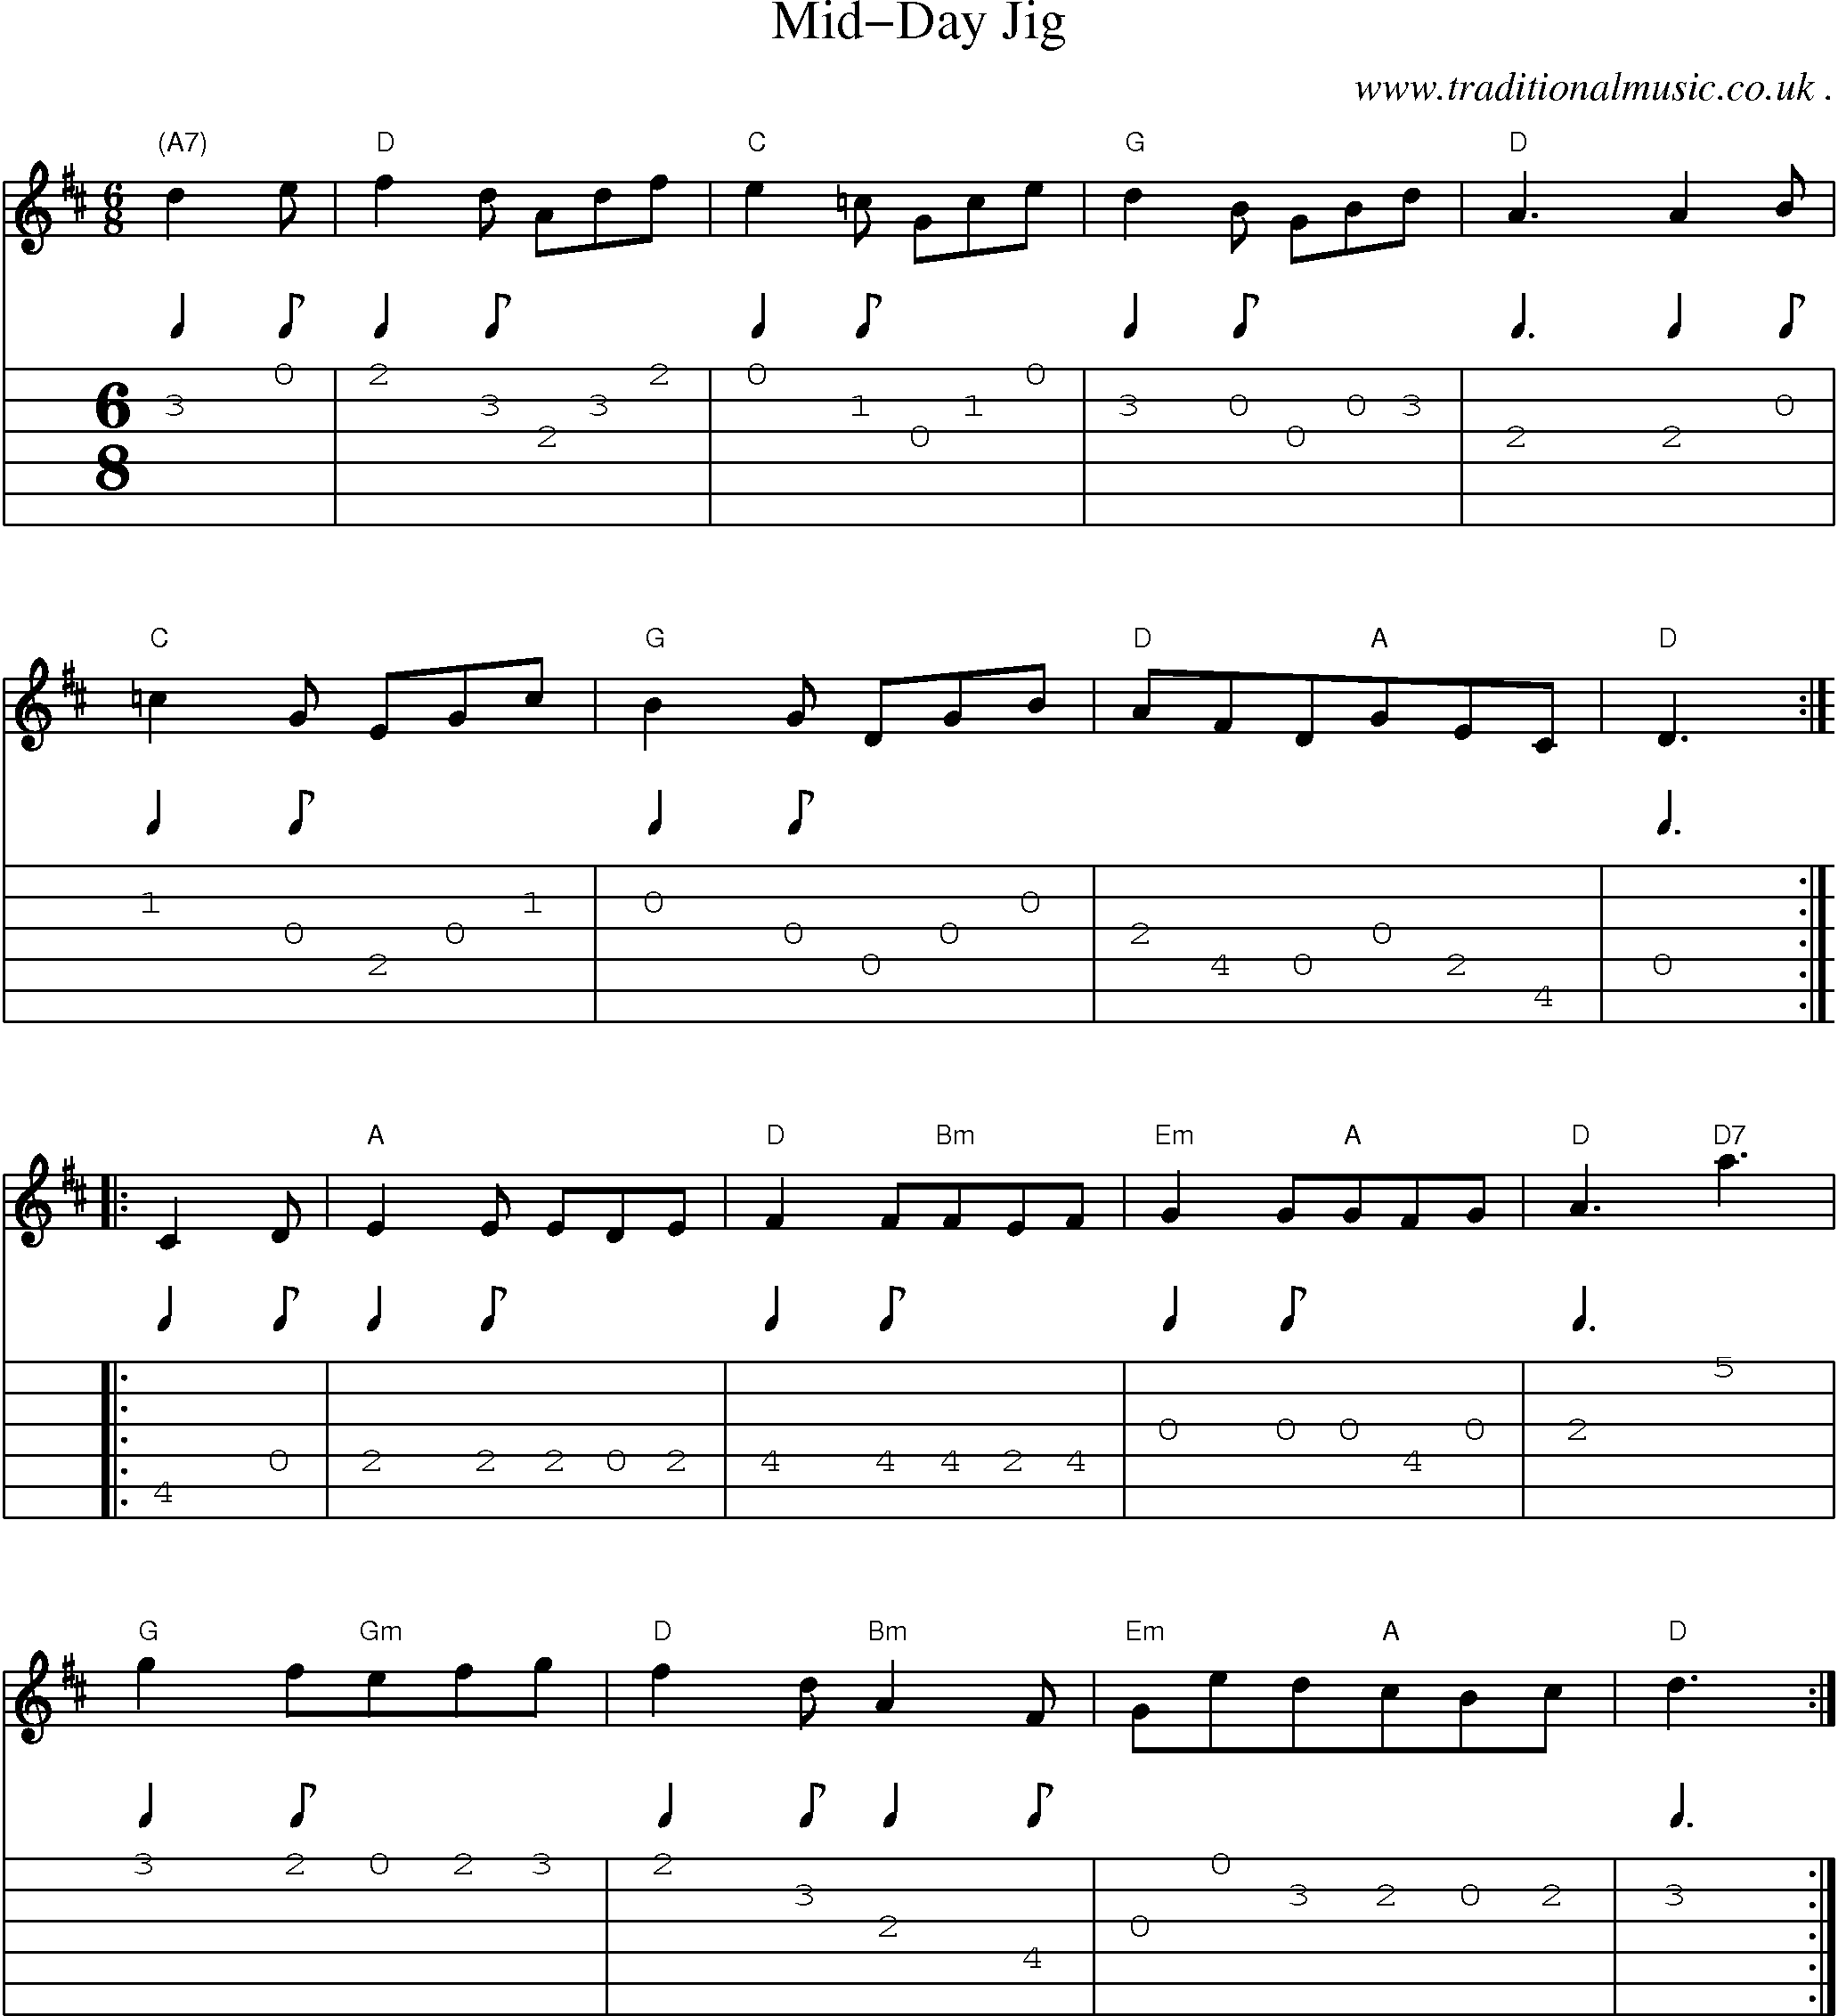 Sheet-Music and Guitar Tabs for Mid-day Jig